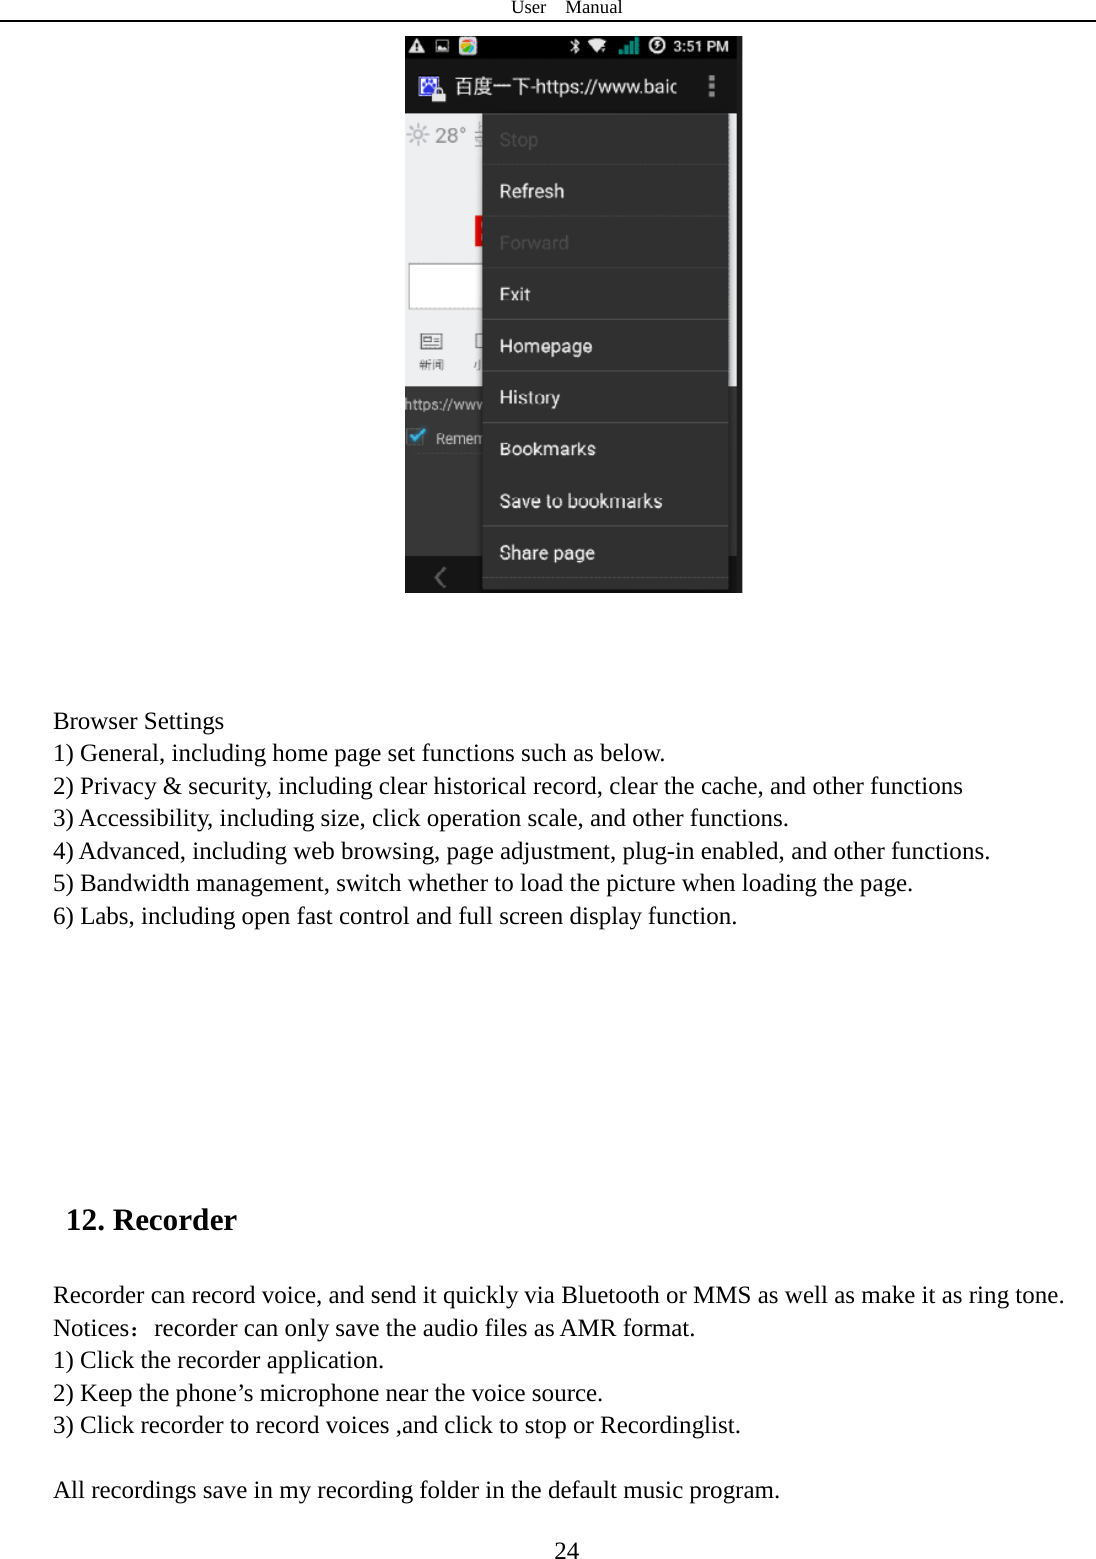 User  Manual  24     Browser Settings 1) General, including home page set functions such as below. 2) Privacy &amp; security, including clear historical record, clear the cache, and other functions 3) Accessibility, including size, click operation scale, and other functions. 4) Advanced, including web browsing, page adjustment, plug-in enabled, and other functions. 5) Bandwidth management, switch whether to load the picture when loading the page. 6) Labs, including open fast control and full screen display function.        12. Recorder Recorder can record voice, and send it quickly via Bluetooth or MMS as well as make it as ring tone. Notices：recorder can only save the audio files as AMR format. 1) Click the recorder application. 2) Keep the phone’s microphone near the voice source. 3) Click recorder to record voices ,and click to stop or Recordinglist.  All recordings save in my recording folder in the default music program.    